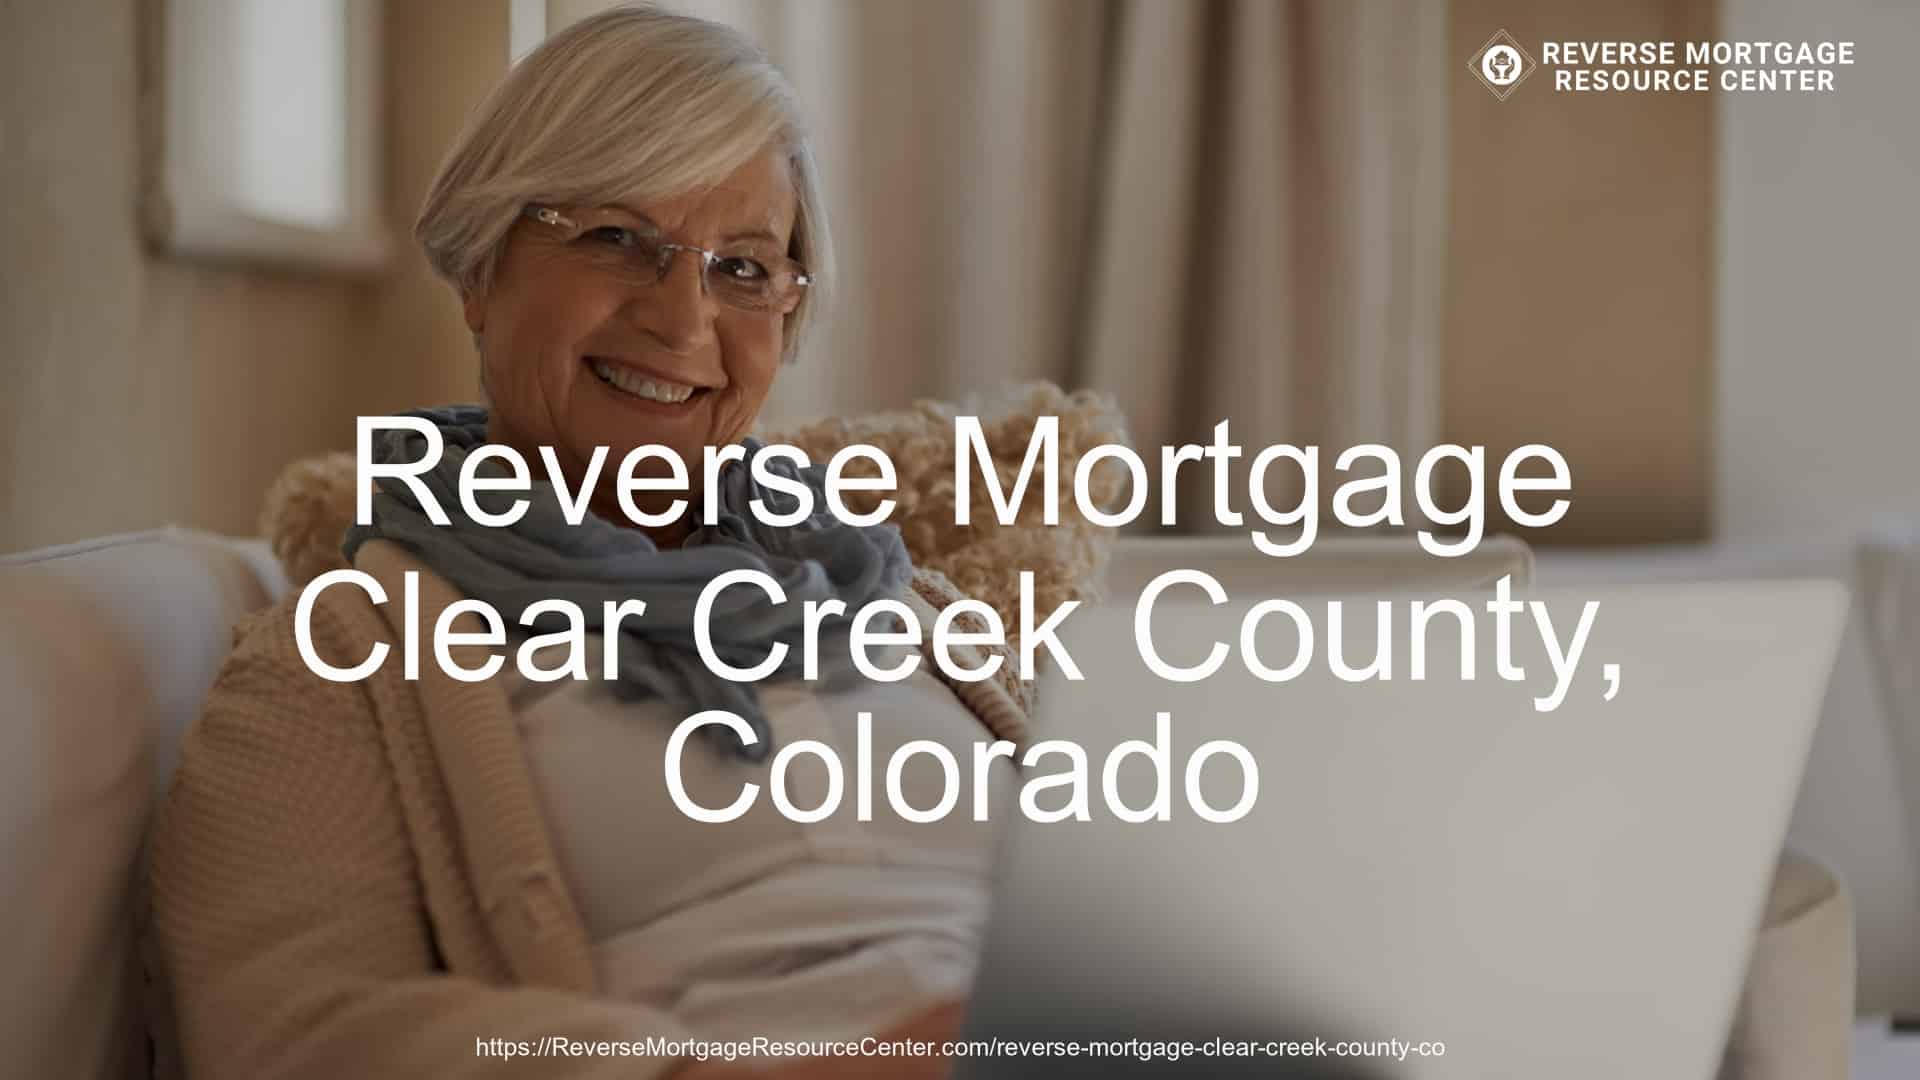 Reverse Mortgage Loans in Clear Creek County Colorado